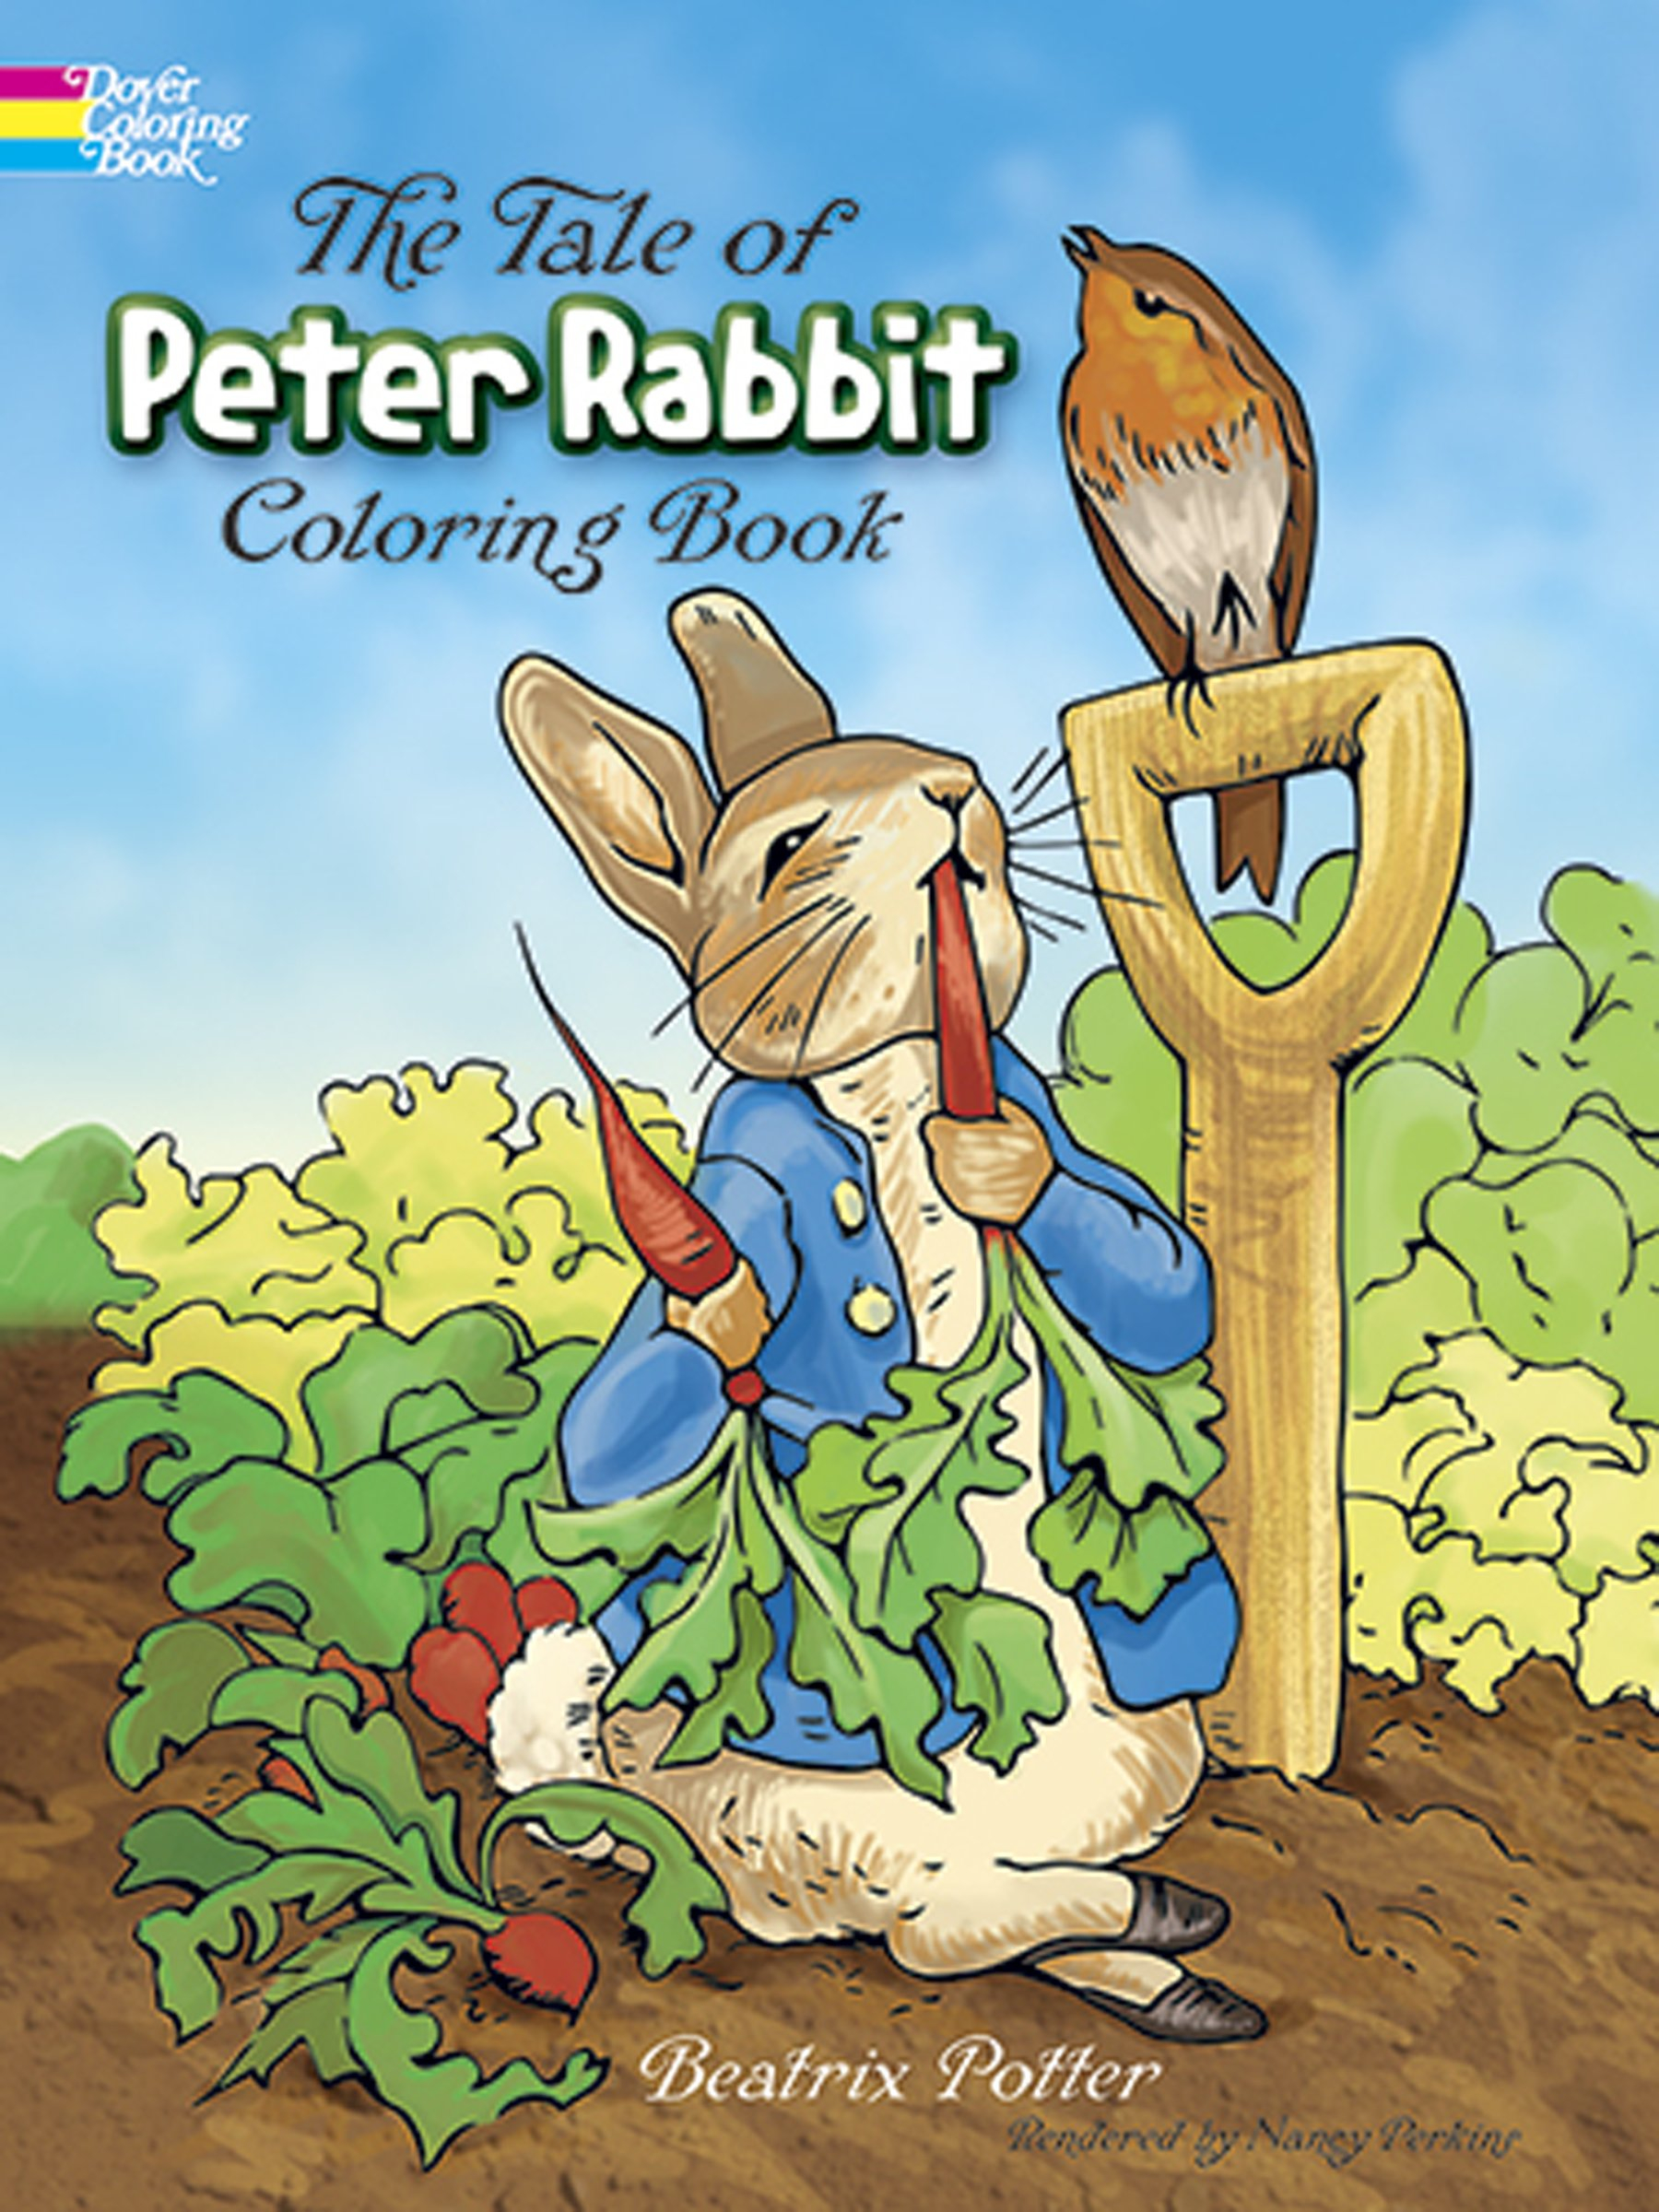 Free Printable Peter Rabbit Coloring Pages Coloring Pages 918wp9jyh8l Coloring Pages Beatrix Potter Book Free